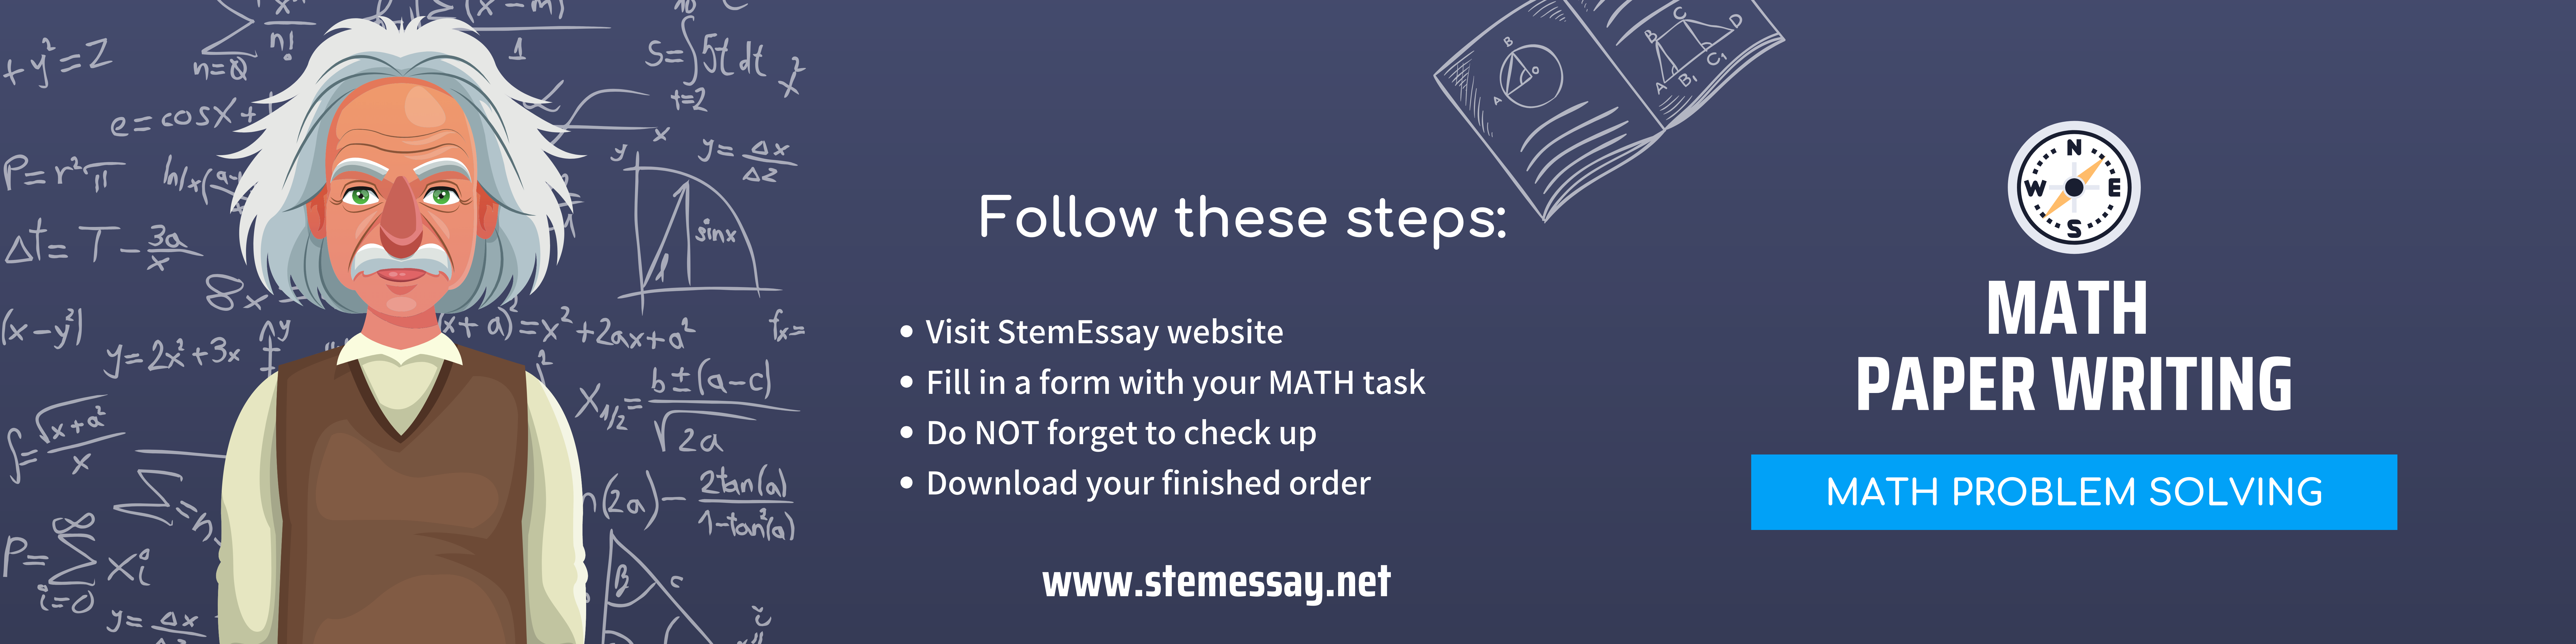 Mathematical Writing Guide. How to Use Technical Writing in Mathematics for Stemessay.Net